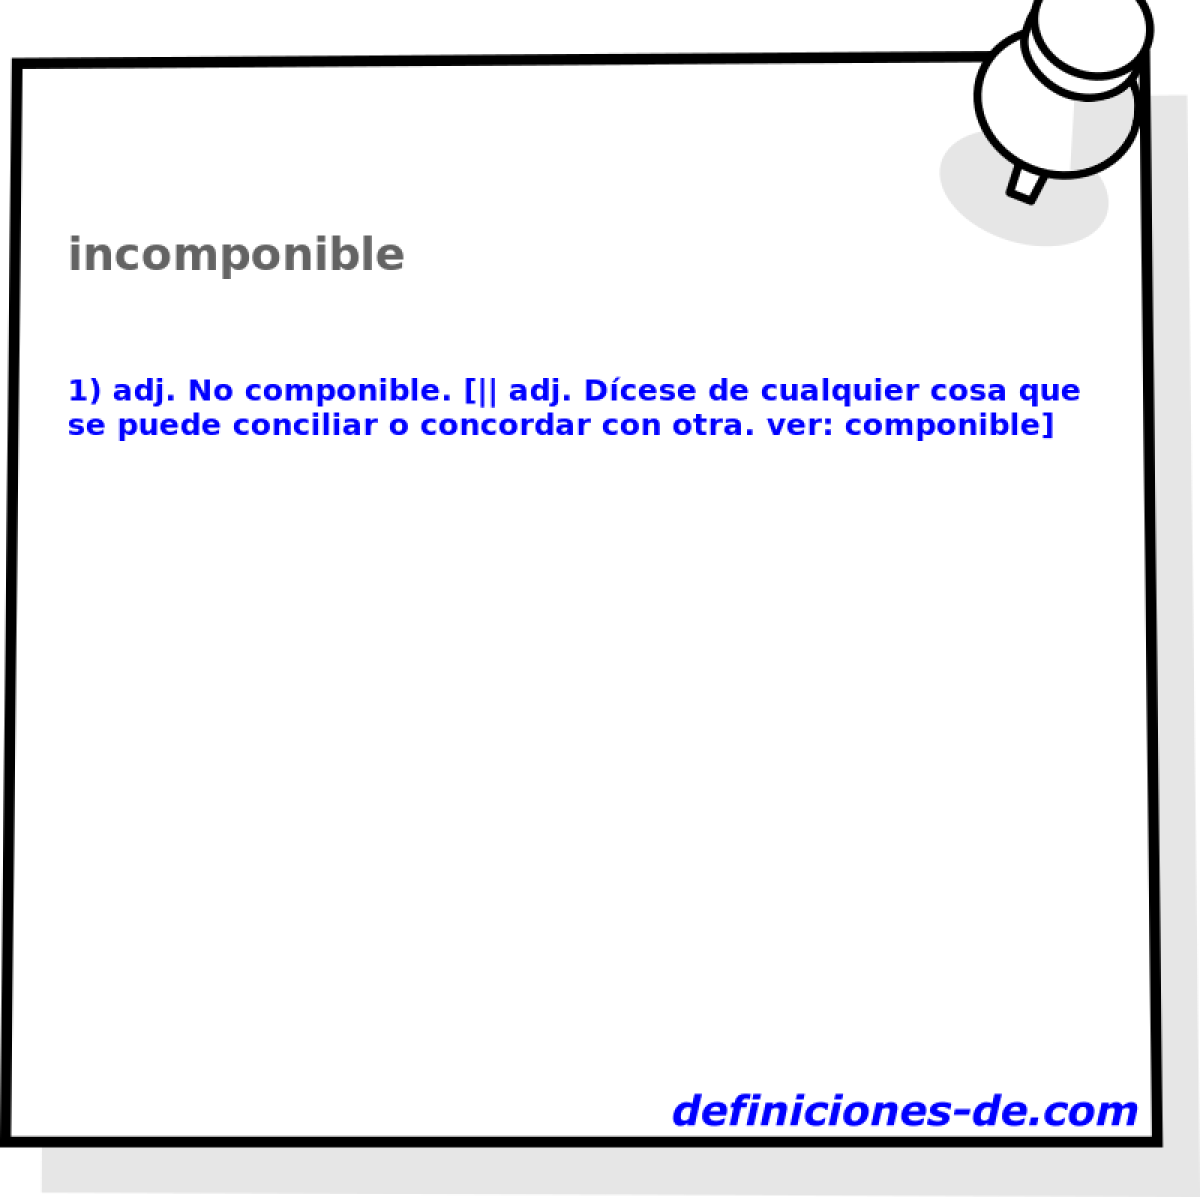 incomponible 